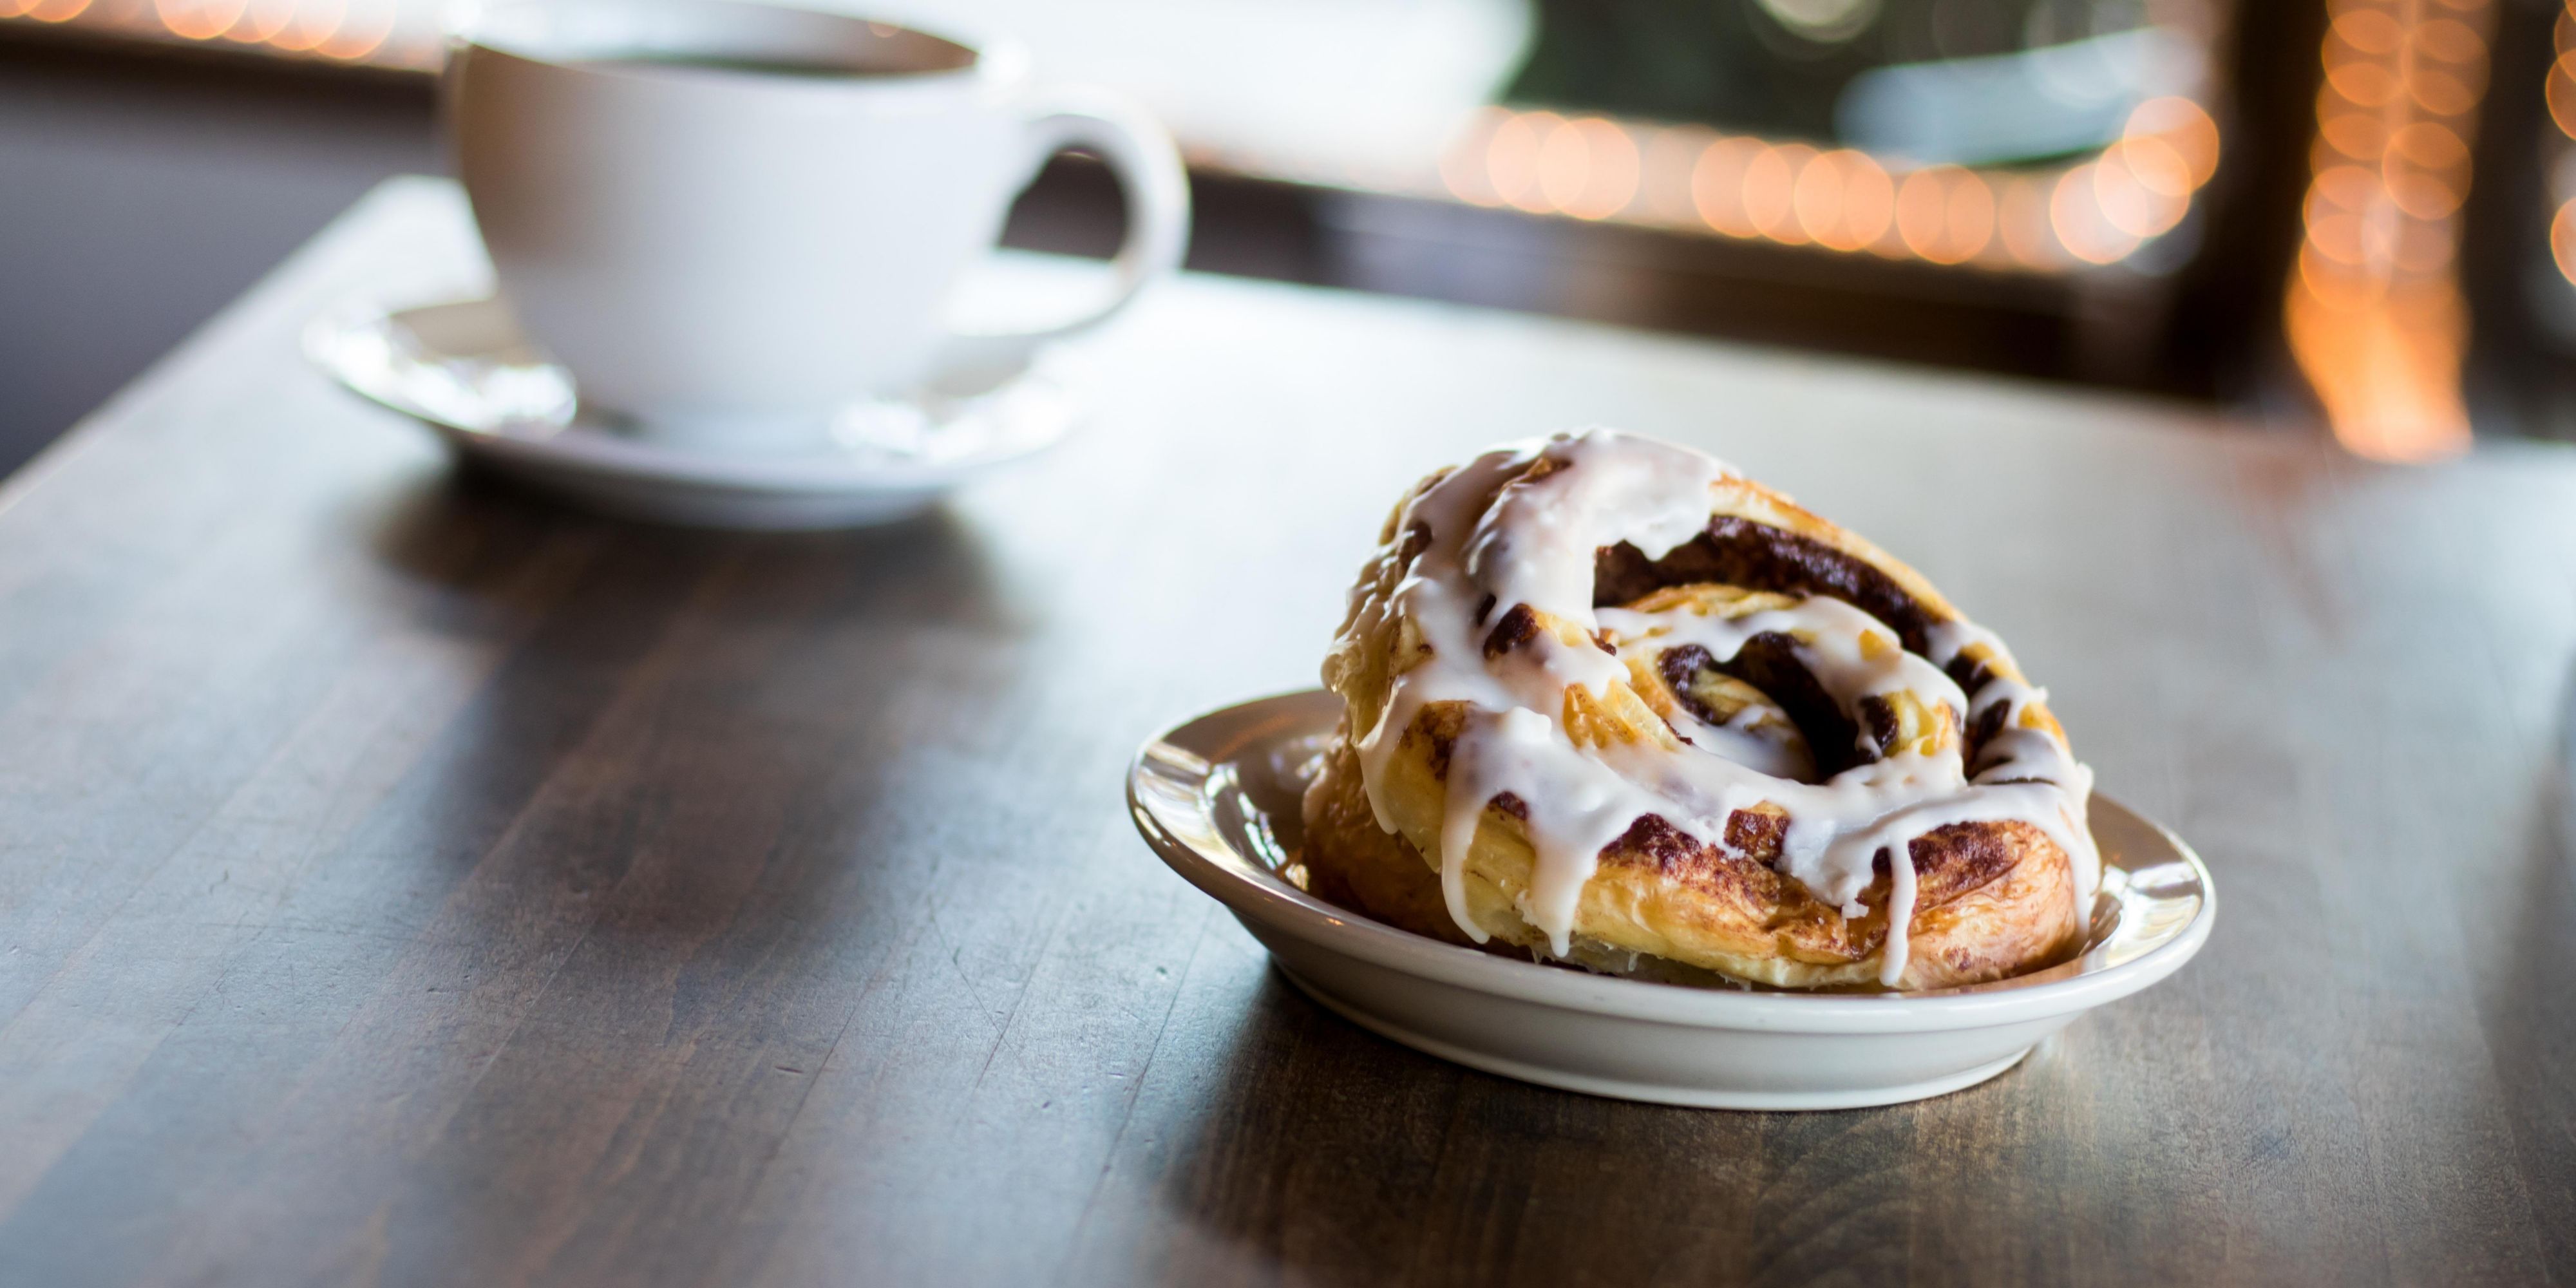 Enjoy our Famous Cinnamon Rolls, Pancakes on Demand as well as Gluten Free Options too!